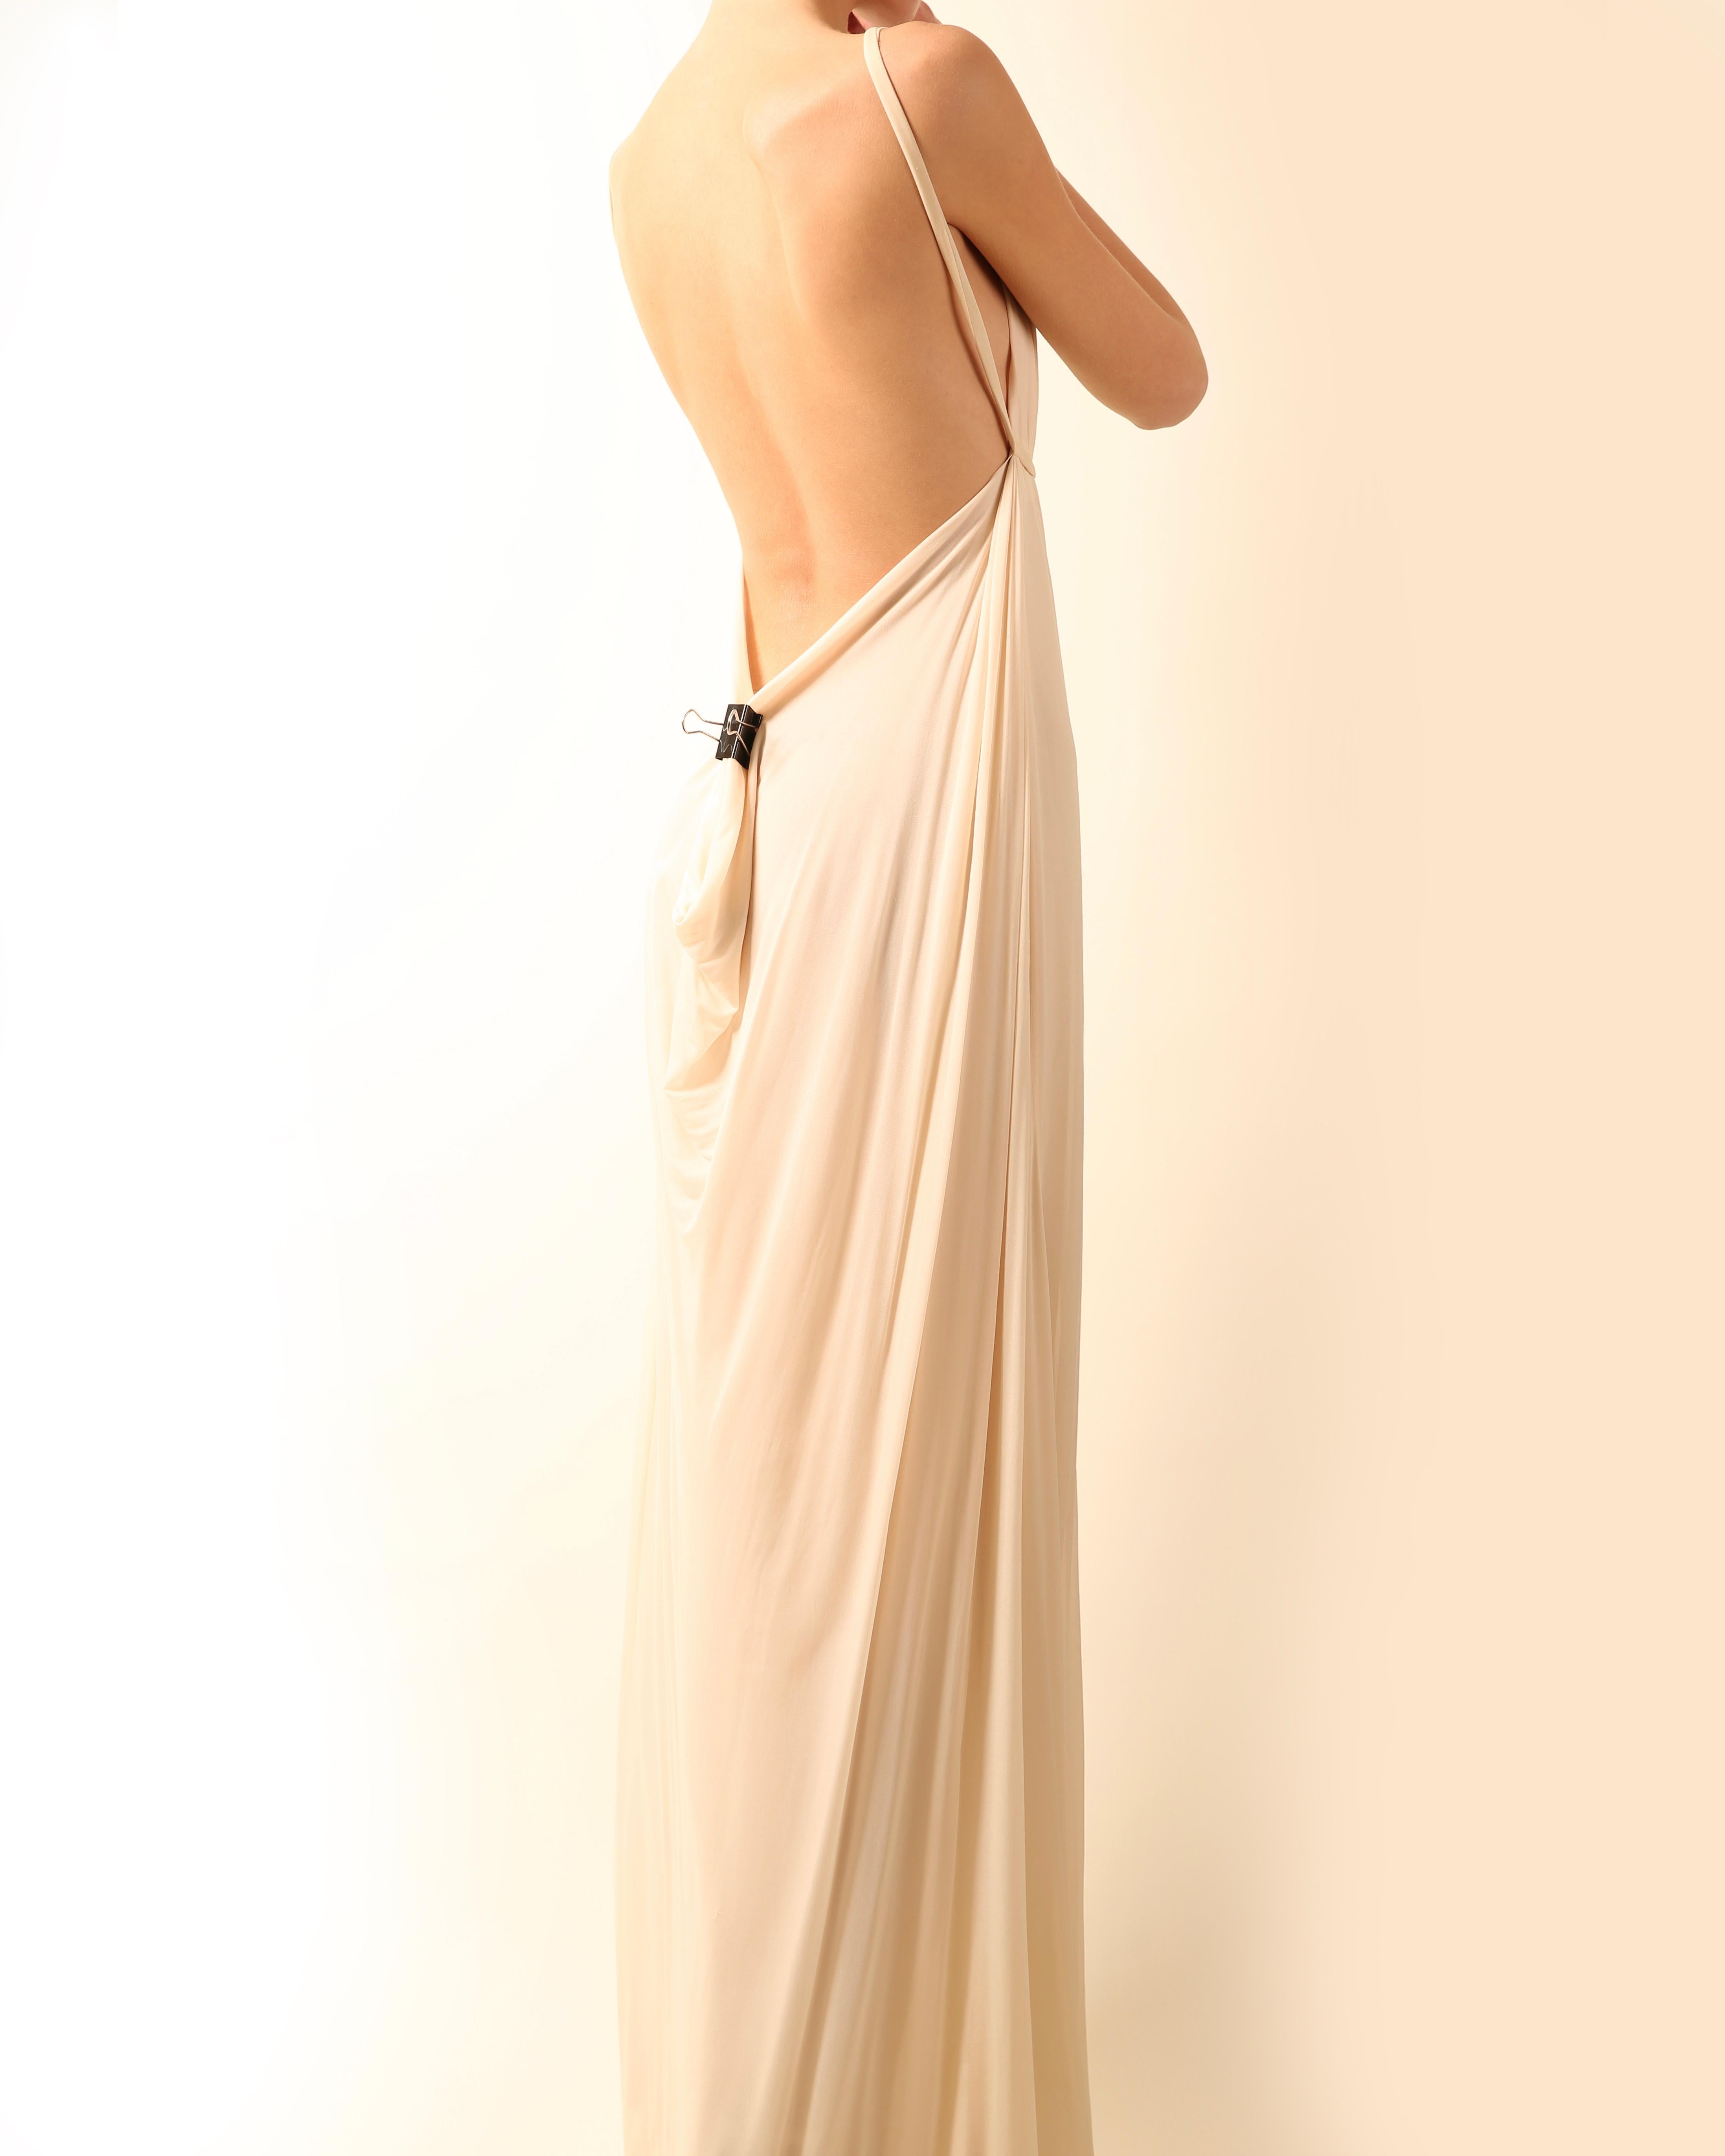 Halston 09 ivory cream plisse grecian style backless wedding maxi dress gown 42 For Sale 5